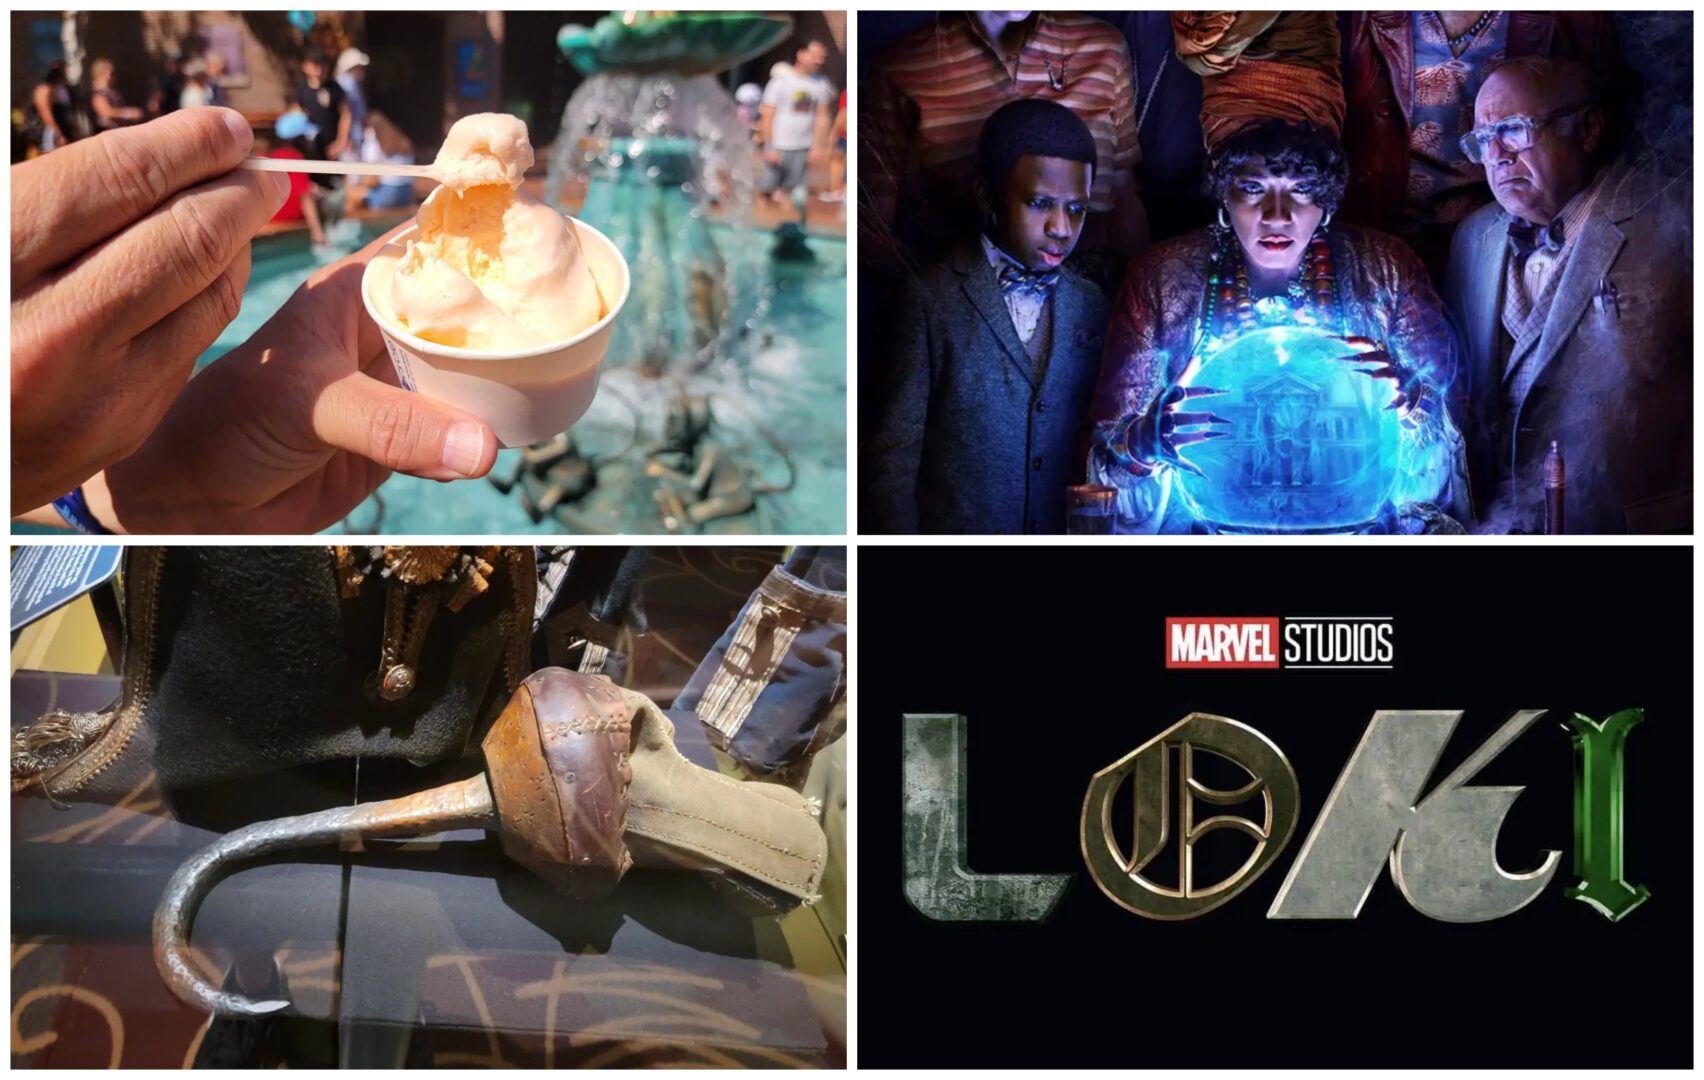 Disney News Highlights: Haunted Mansion Trailer, New POG Gelato Now Available in Disney’s Hollywood Studios, Loki Season 2 Release Date Announced, Indiana Jones Movies and TV Show on Disney +